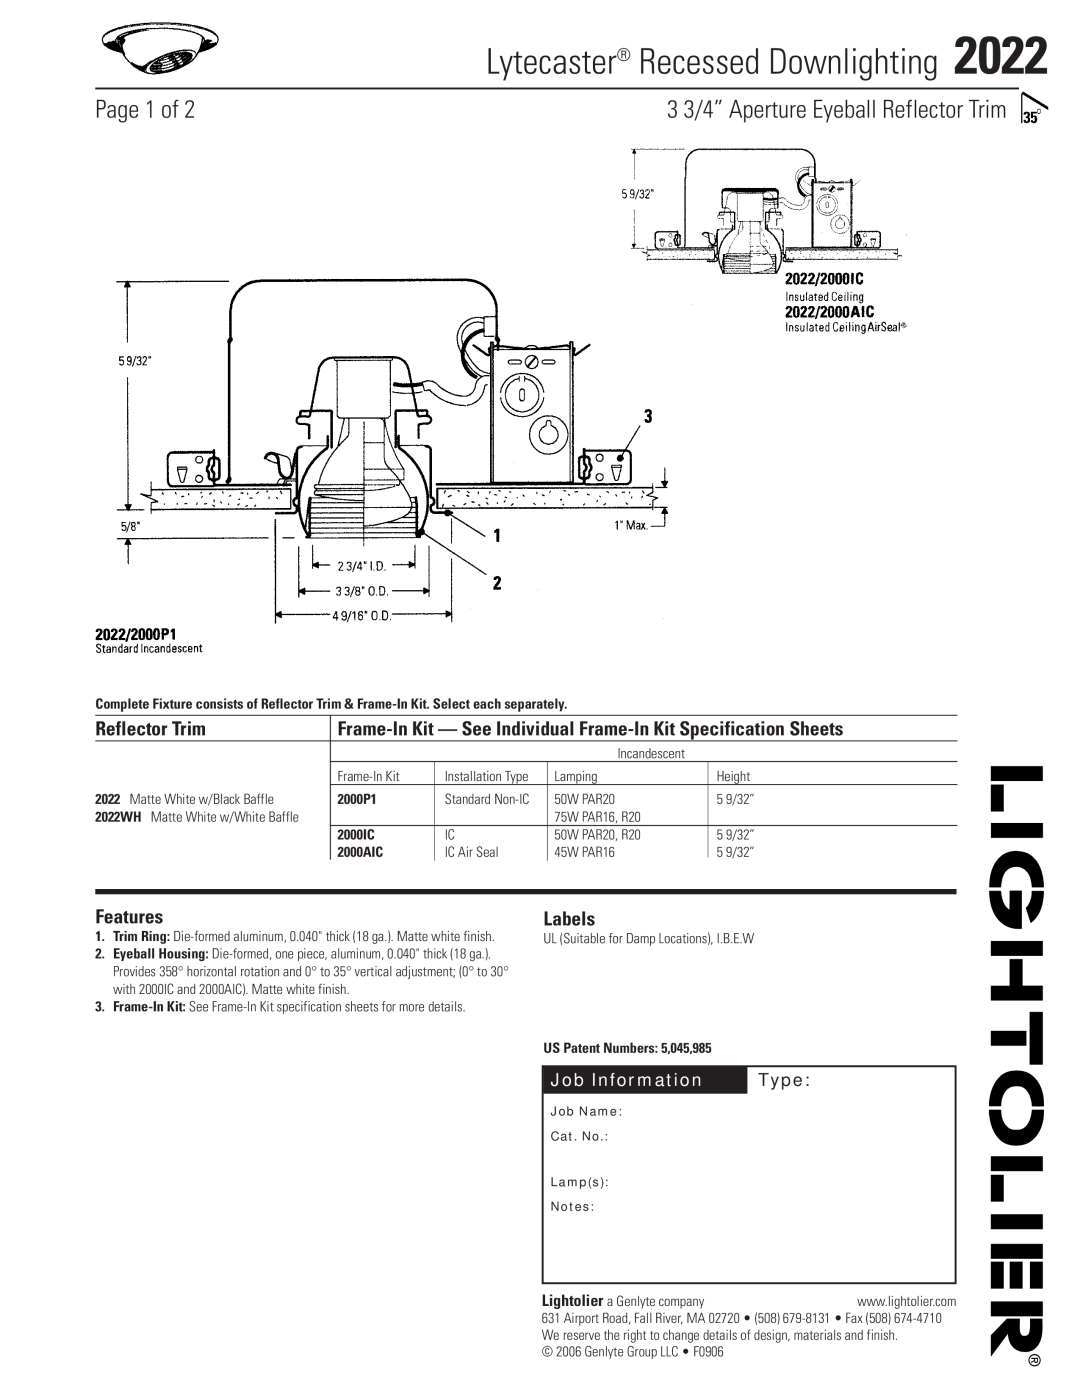 Lightolier 2022 specifications Lytecaster Recessed Downlighting, Page 1 of, 3 3/4” Aperture Eyeball Reflector Trim, Type 